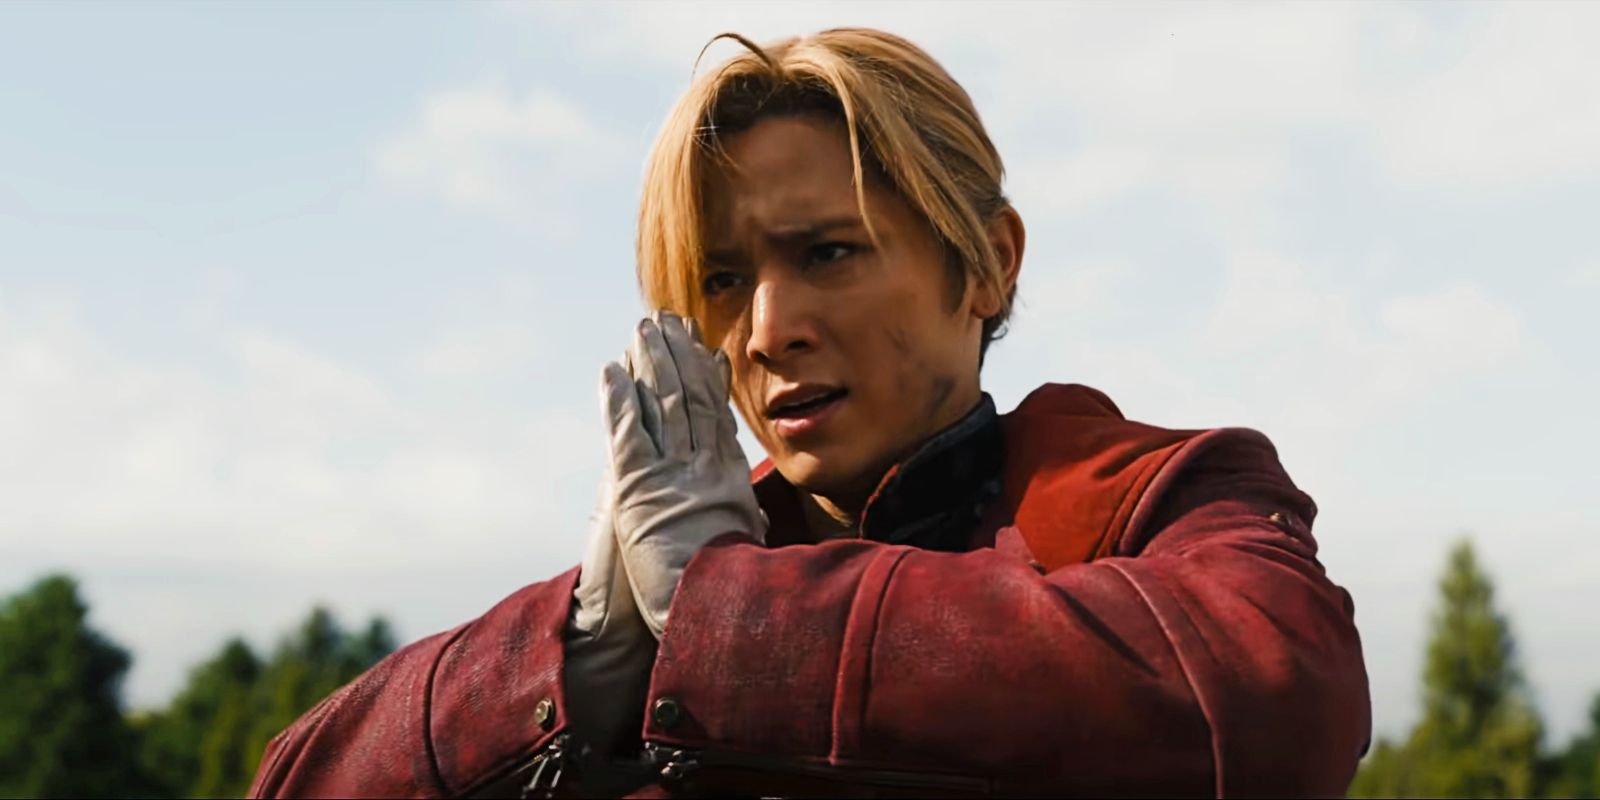 Fullmetal Alchemist Live Action Releases New Visuals and PV, Movie News